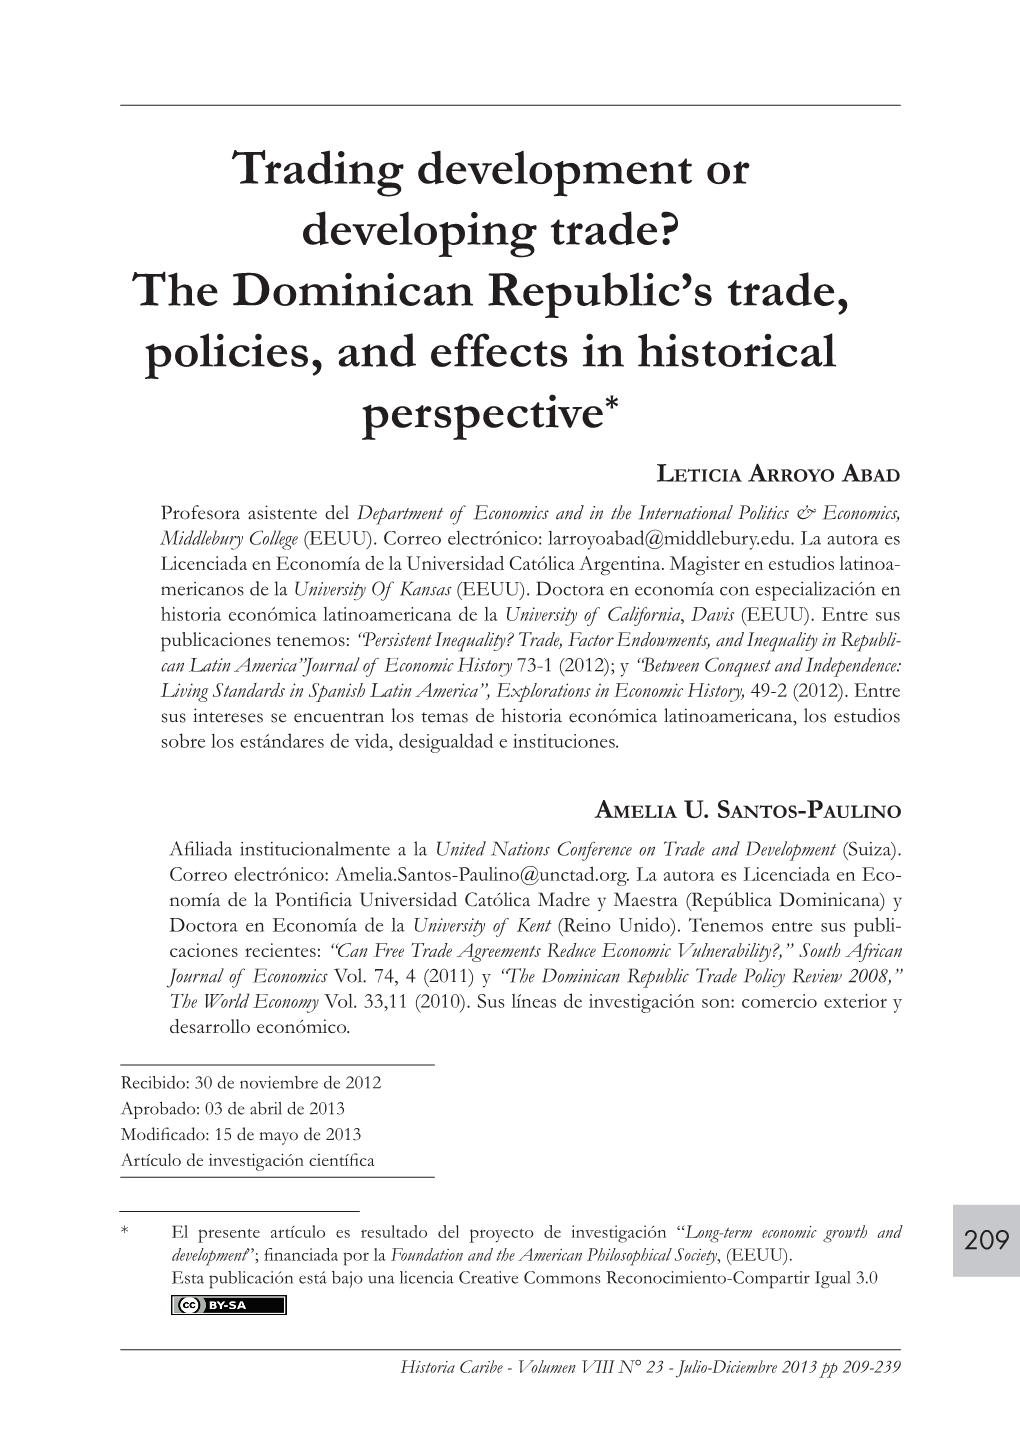 The Dominican Republic's Trade, Policies, and Effects in Historical Perspective